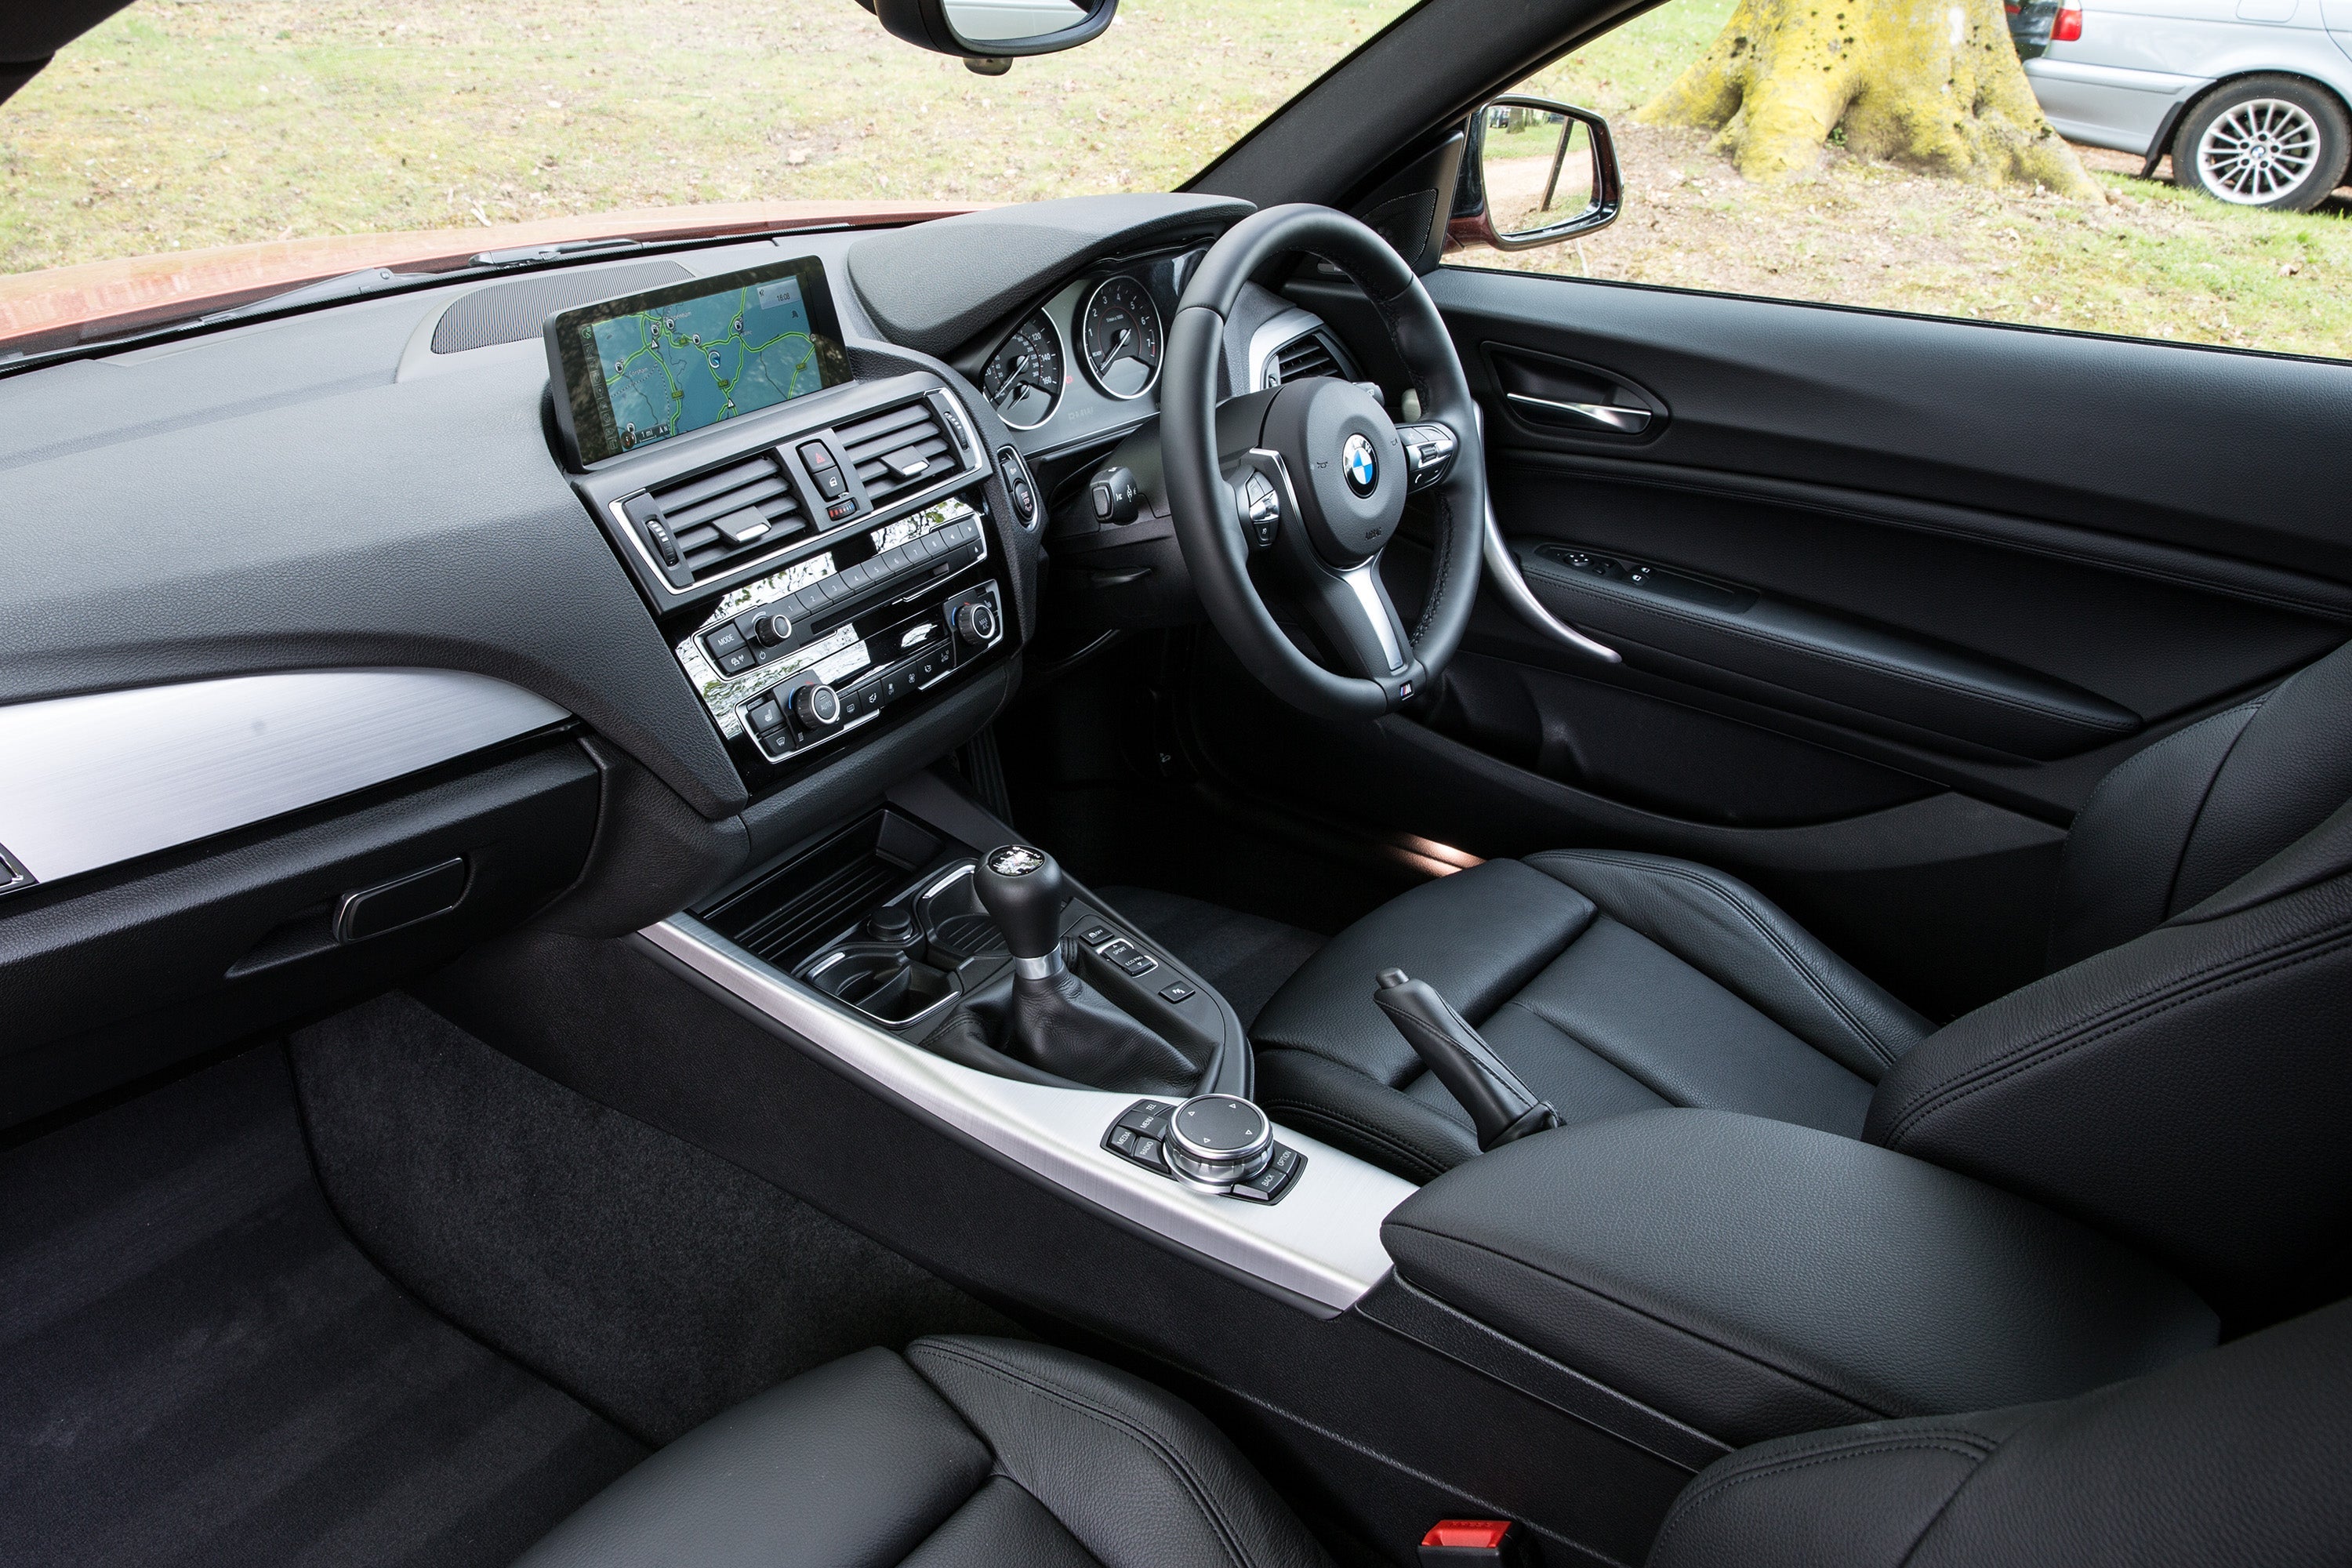 Review: BMW 1 Series F20 ( 2011 - 2019 ) - Almost Cars Reviews